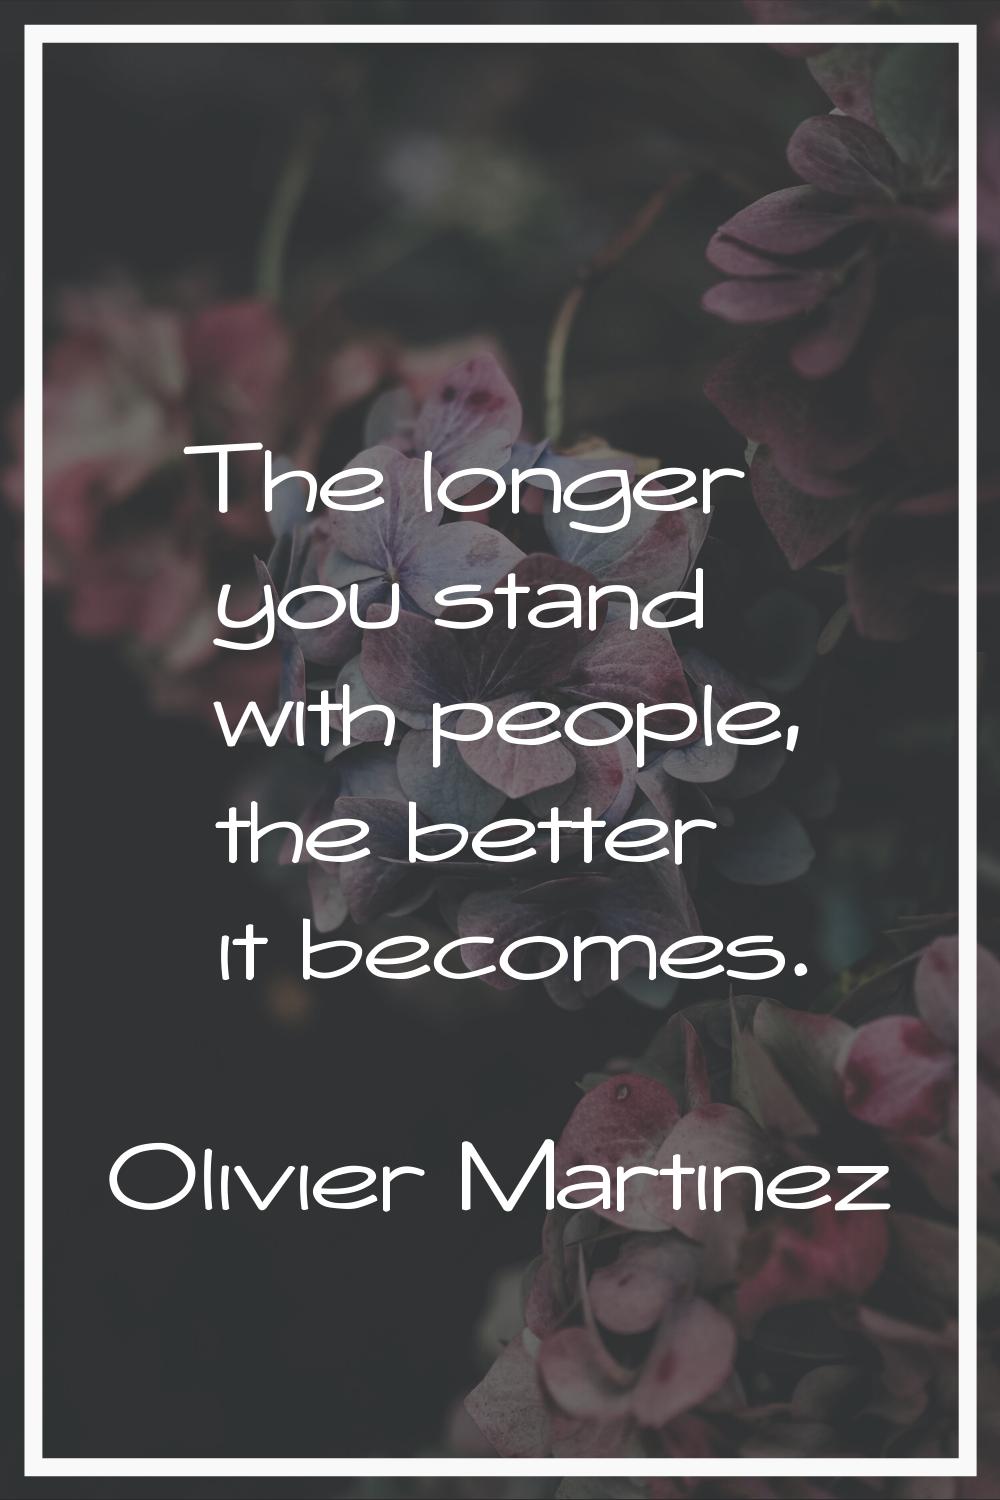 The longer you stand with people, the better it becomes.